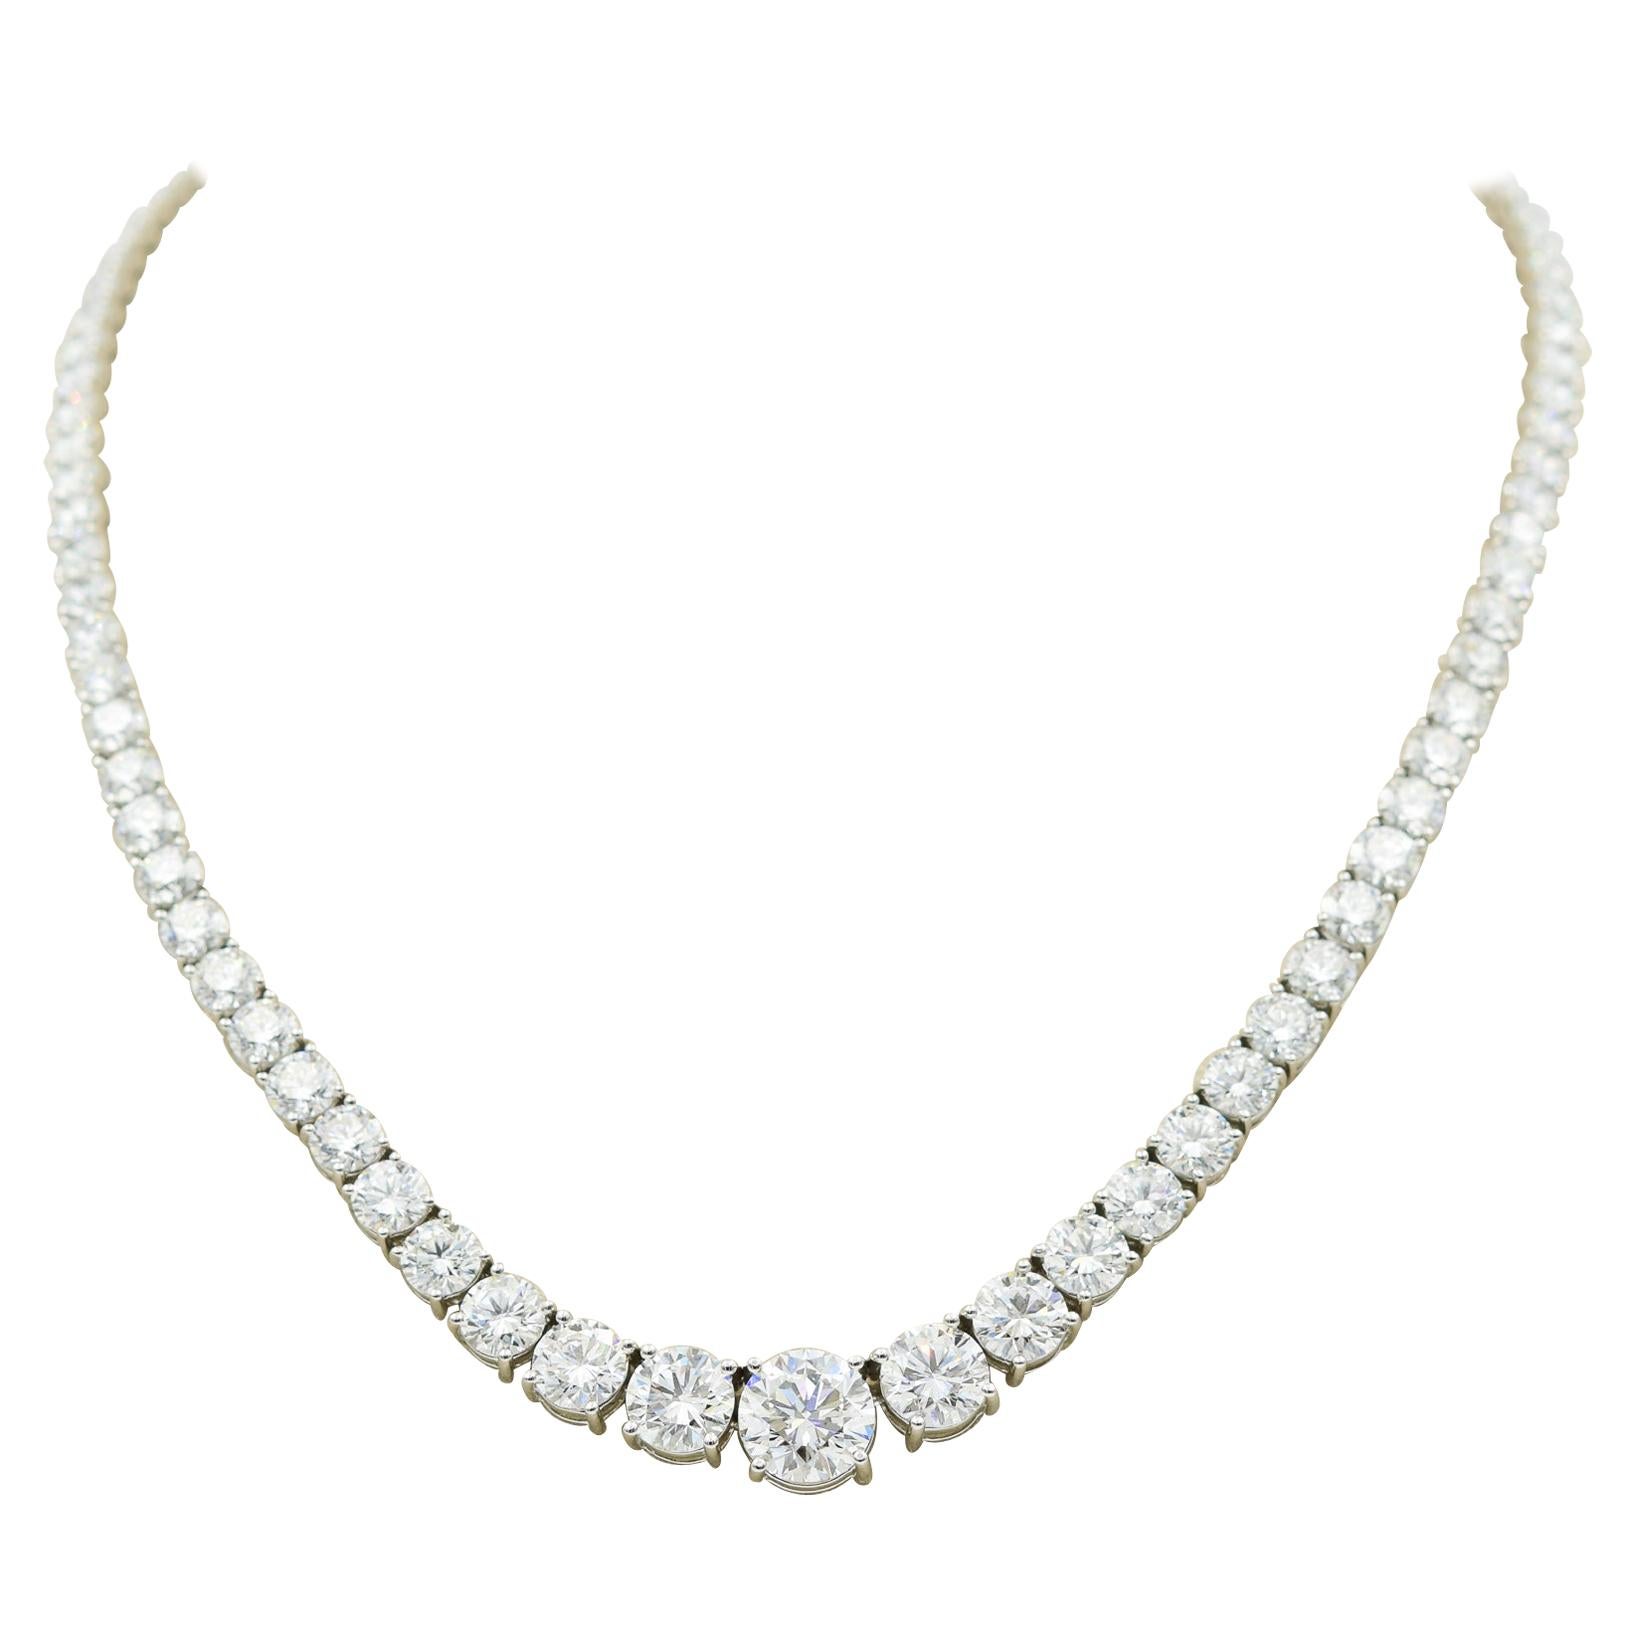 34 Carat Diamond Riviera Necklace in Platinum with GIA Certified Excellent Cuts